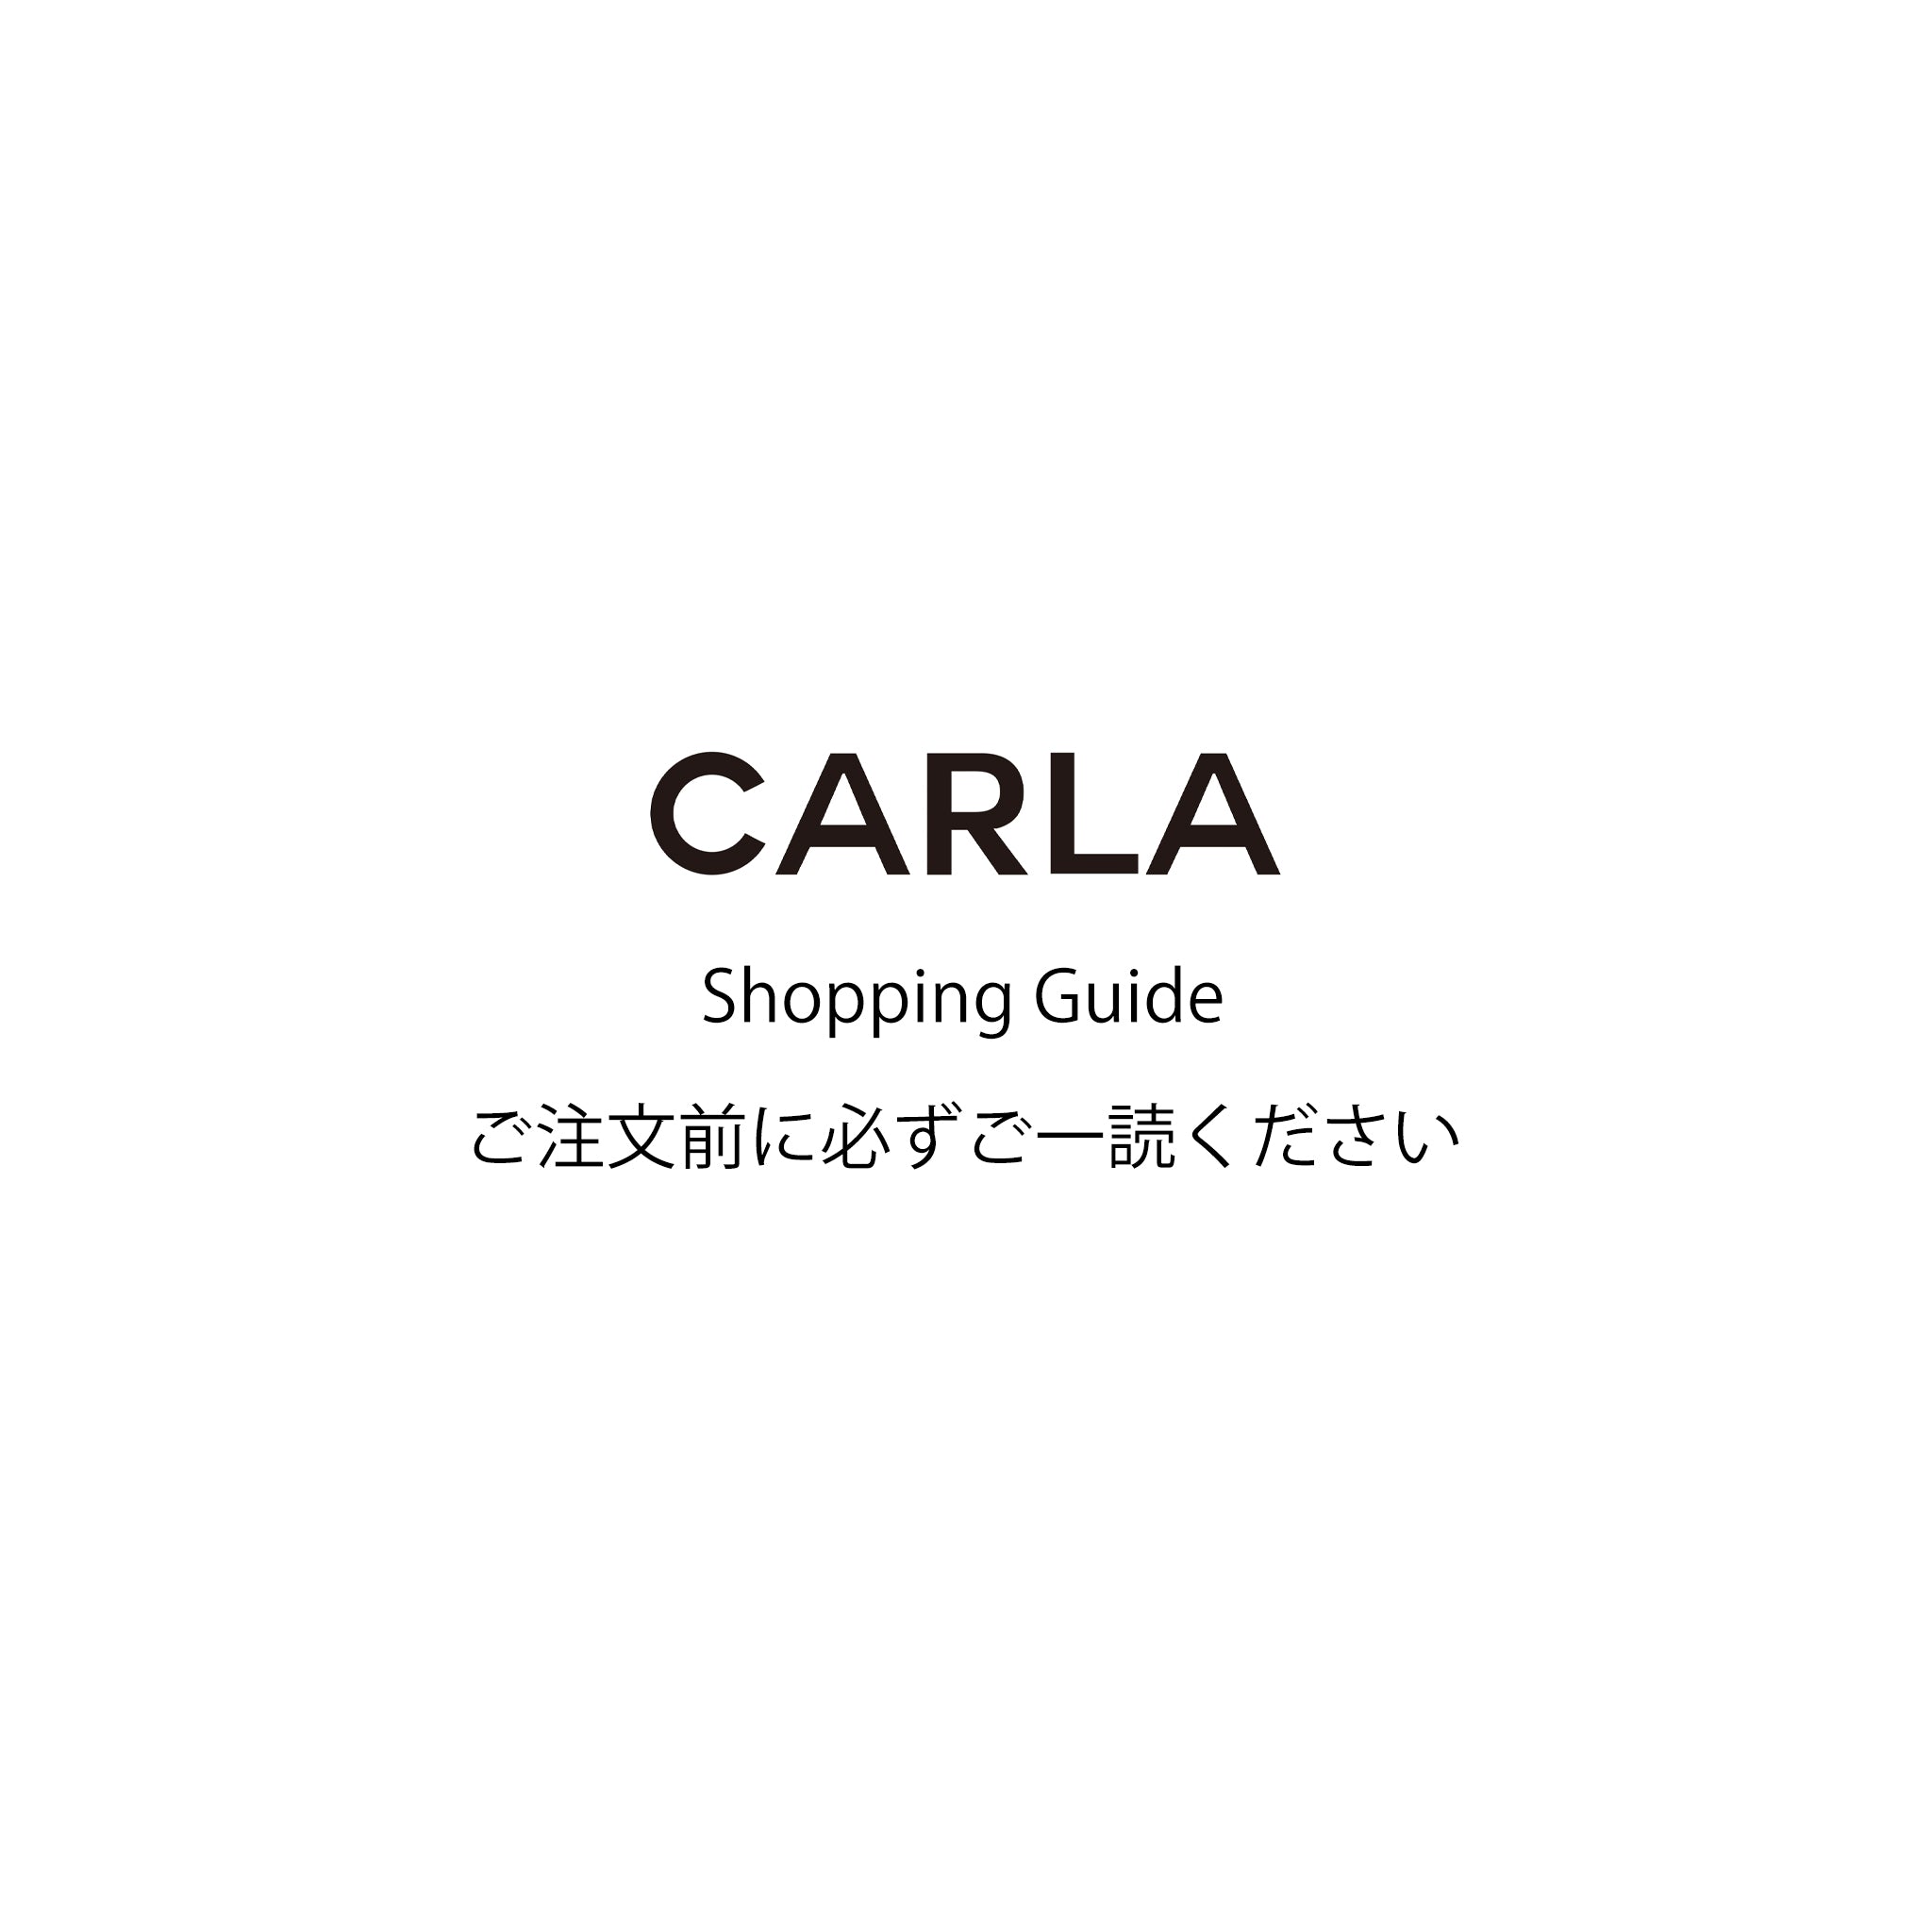 ALL ITEMS – carla.online